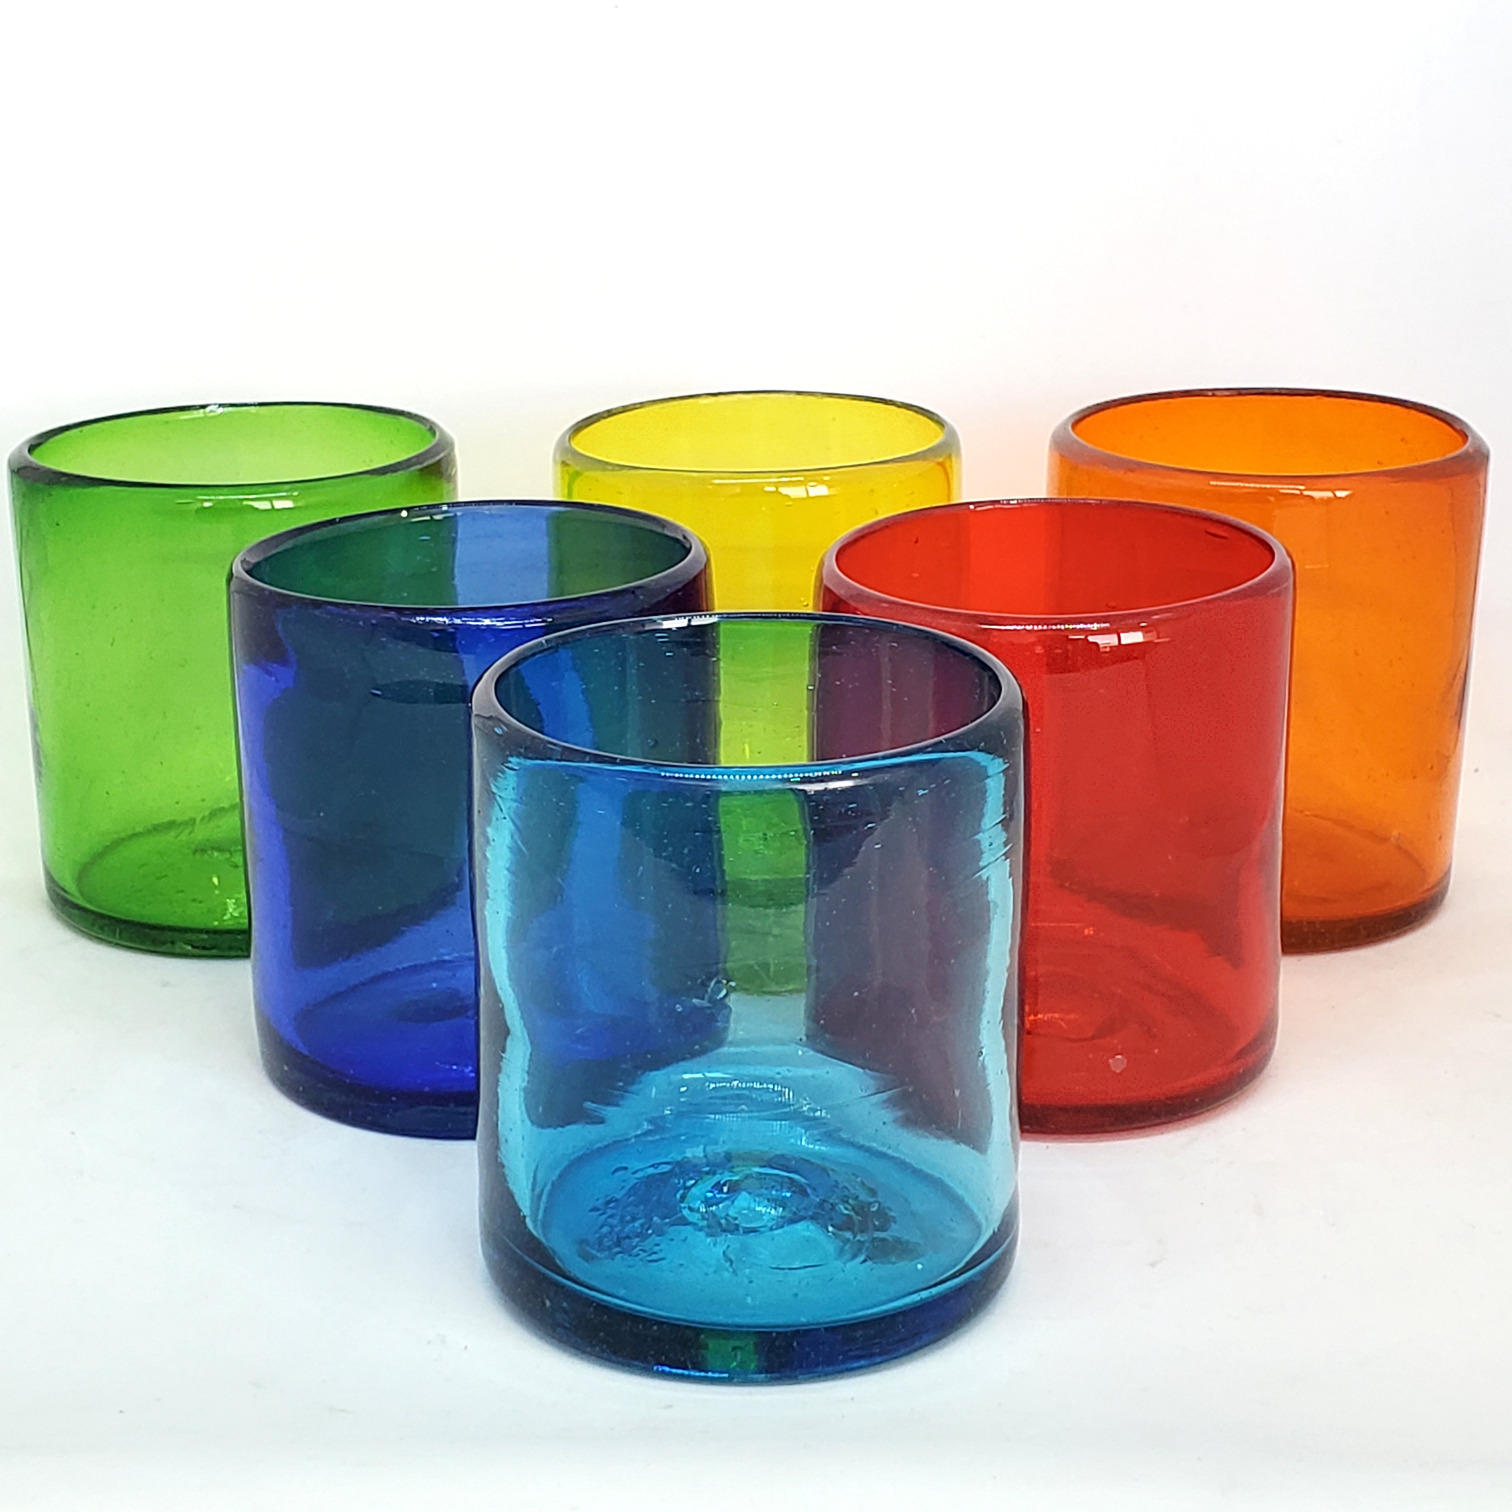 MEXICAN GLASSWARE / Rainbow Colored 9 oz Short Tumblers (set of 6) / Enhance your favorite drink with these colorful handcrafted glasses.